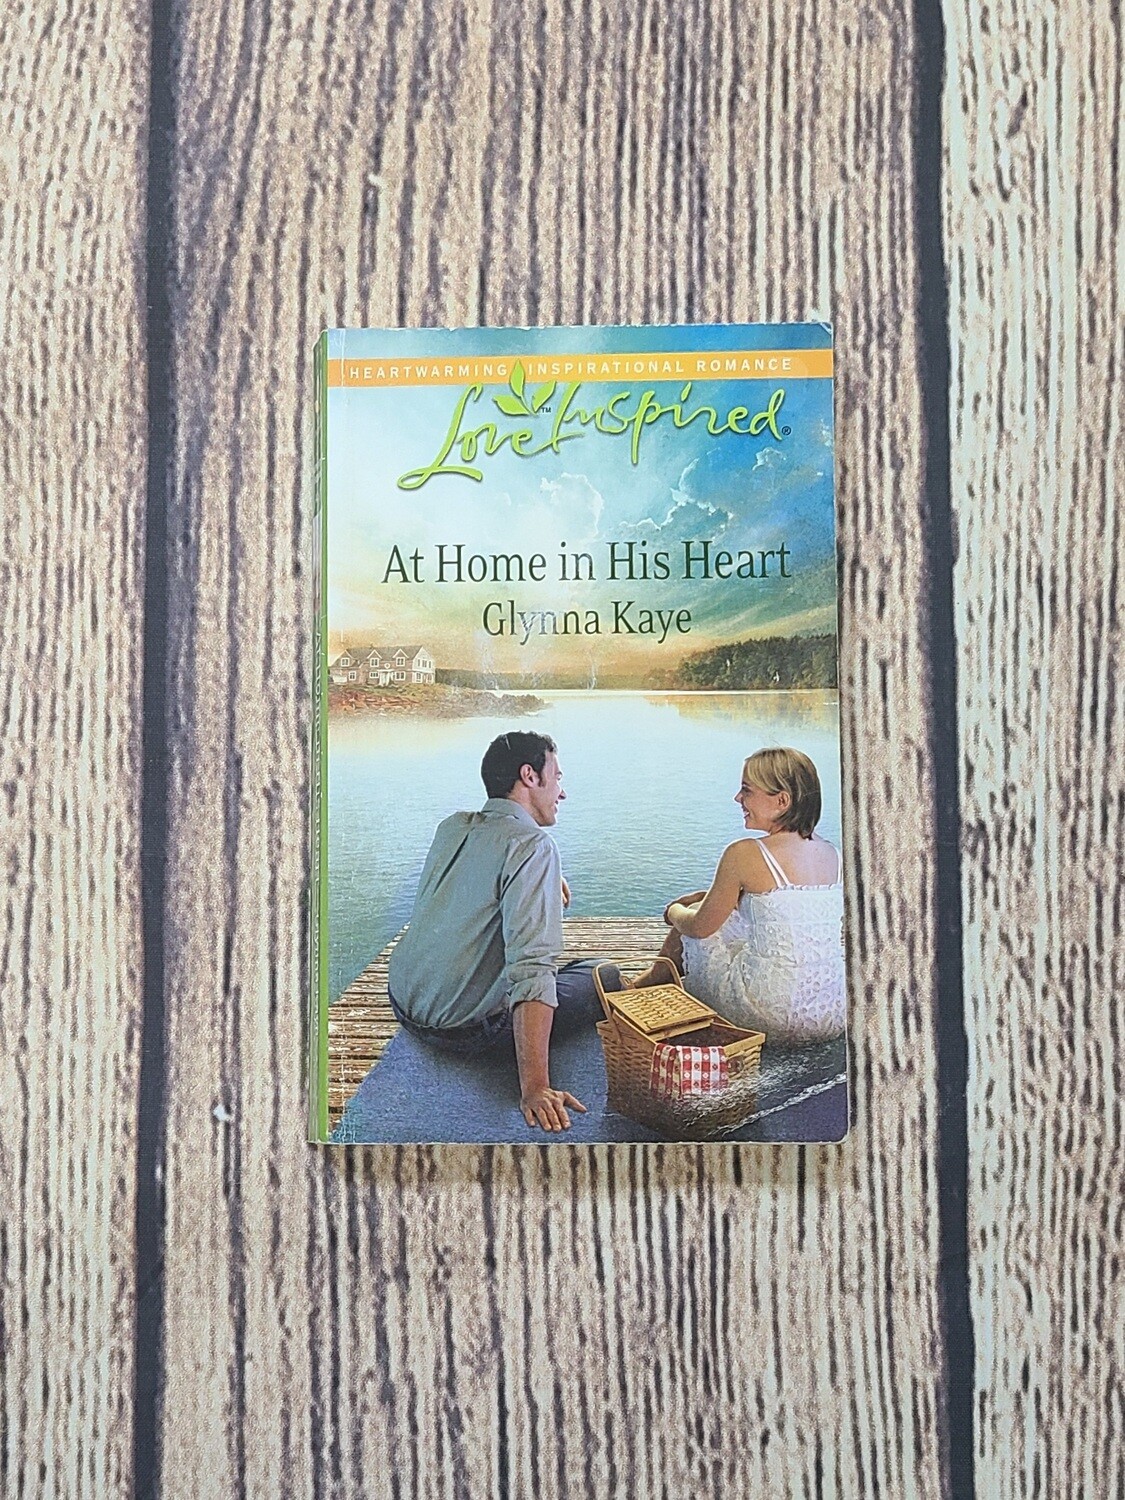 At Home in His Heart by Glynna Kaye